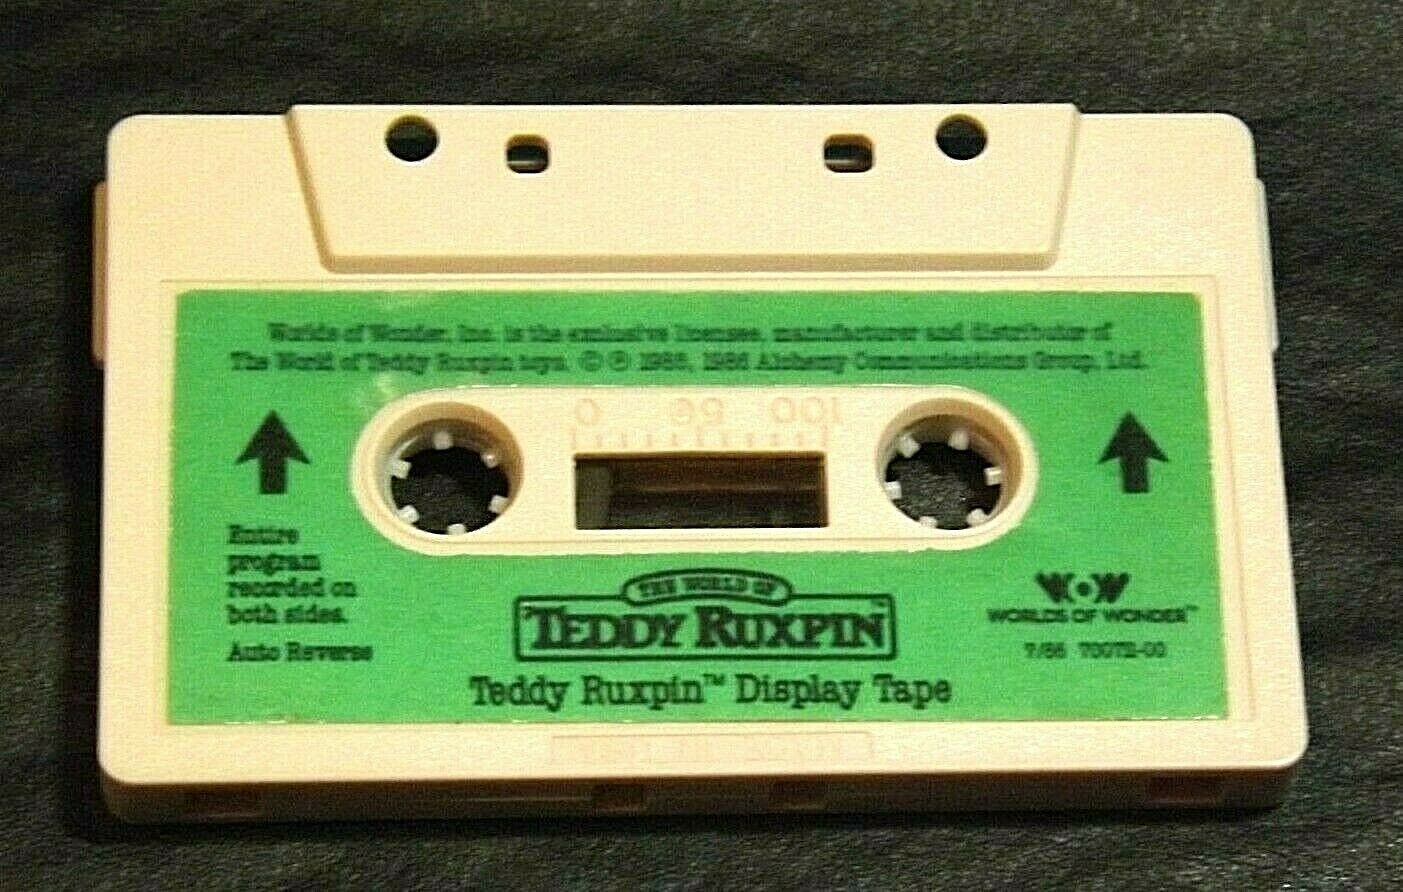 Teddy Ruxpin Display Tape Green Worlds Of Wonder -tape Only-works